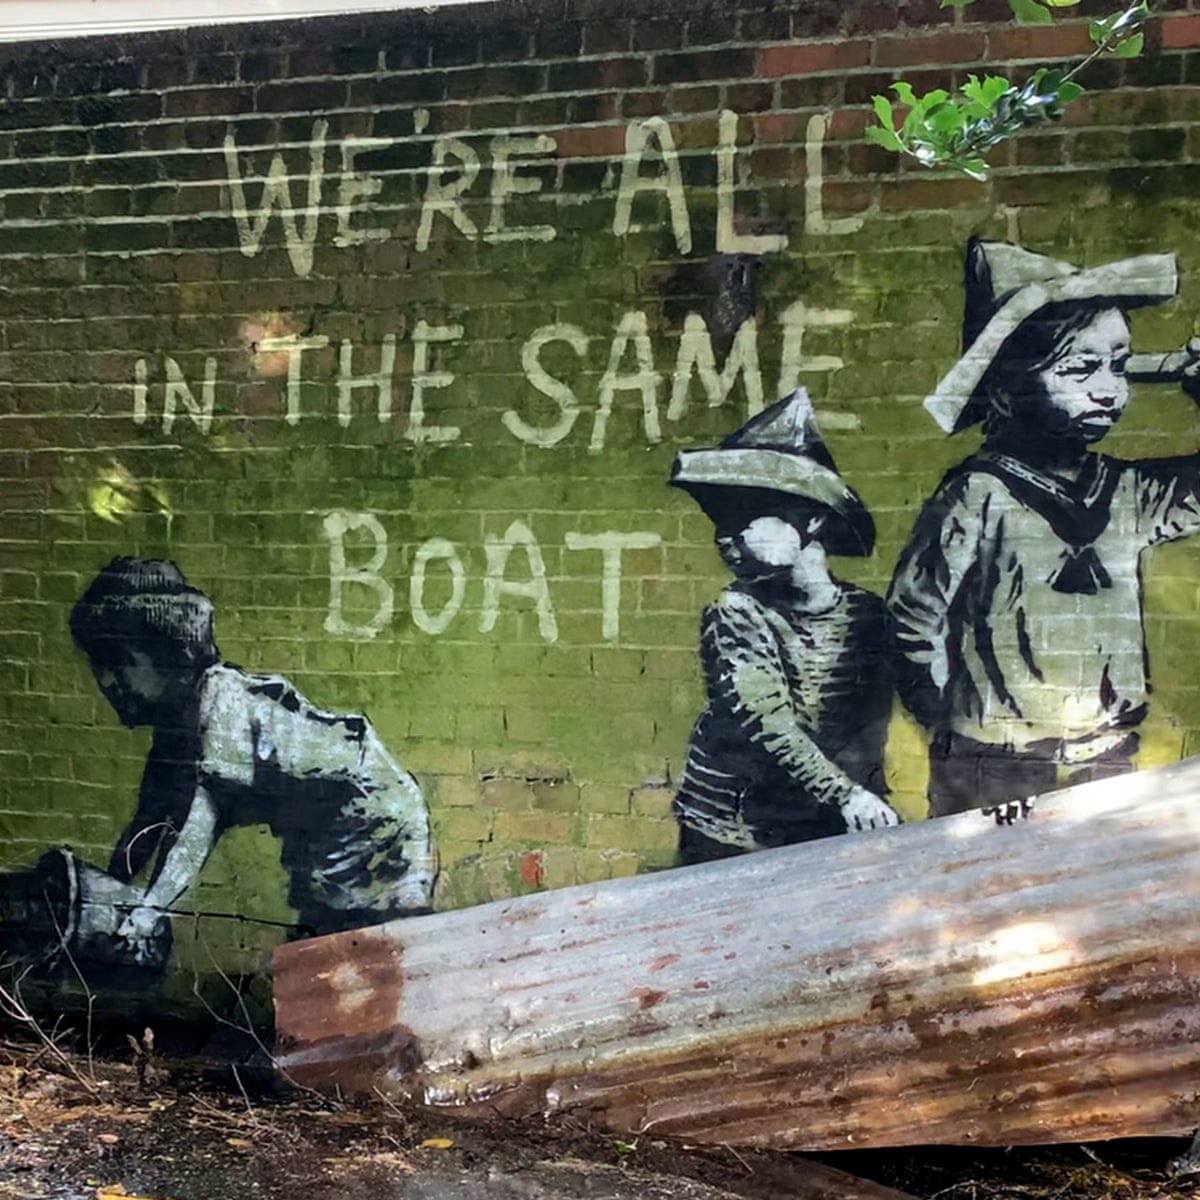 Possible Banksy street art appears in English coastal towns